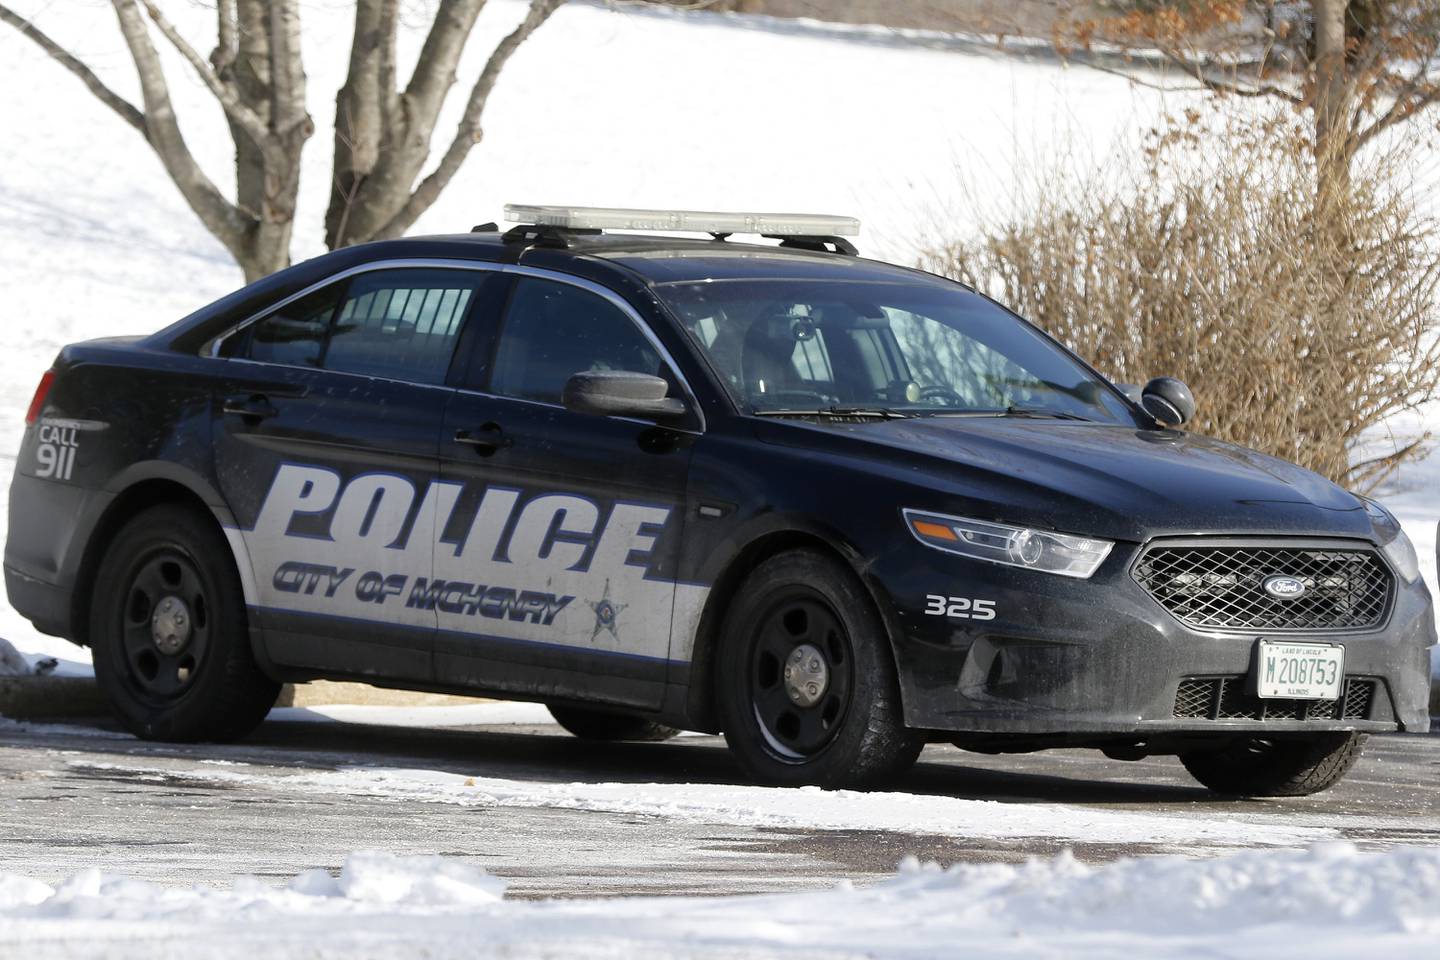 A McHenry police vehicle is seen on Wednesday, Jan. 5, 2022 in McHenry. City officials want to try to replace squad cars every five years, and longer periods for heavier vehicles like plow trucks, and would need to spend about $634,000 a year on replacement of vehicles on their ideal schedule for equipment life, which includes about $120,000 a year on replacing the police department's outdated or worn light equipment like laptops.